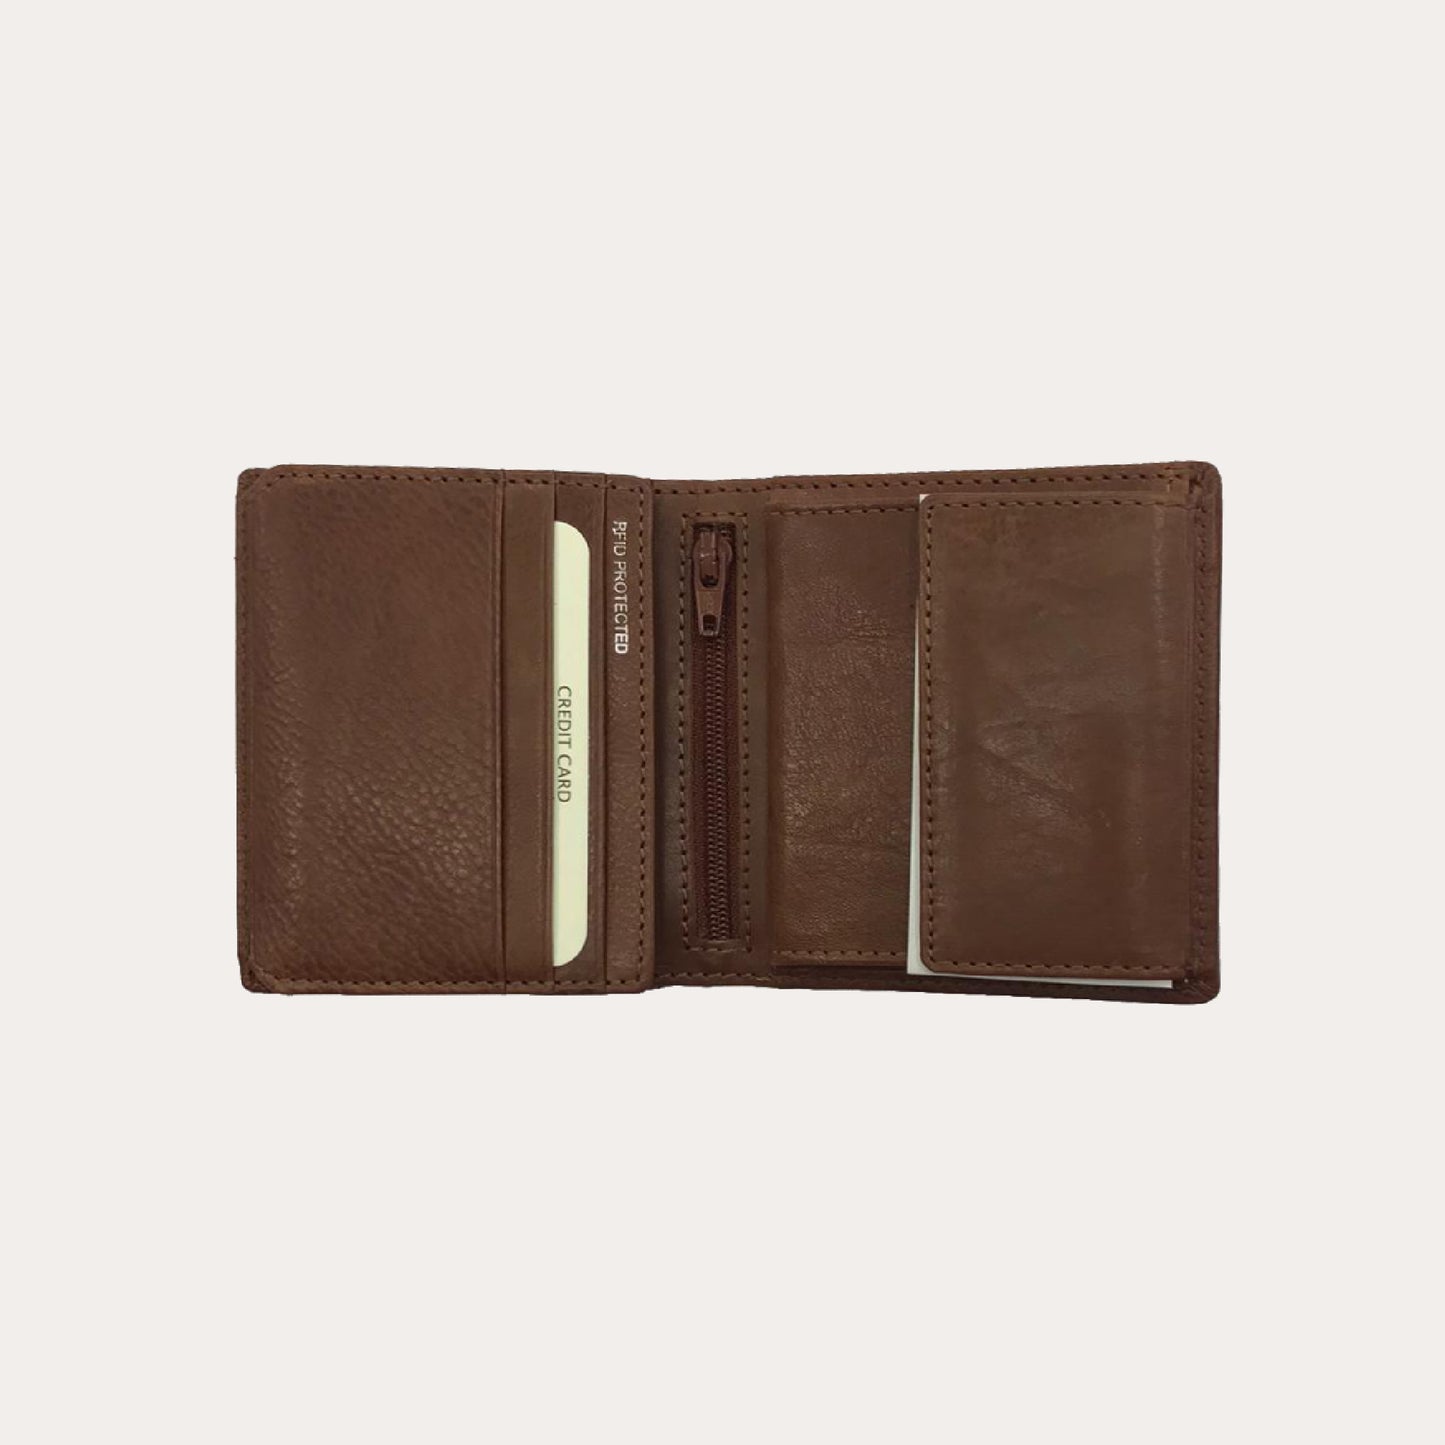 Tan Leather Wallet-6 Credit Card/Coin Section